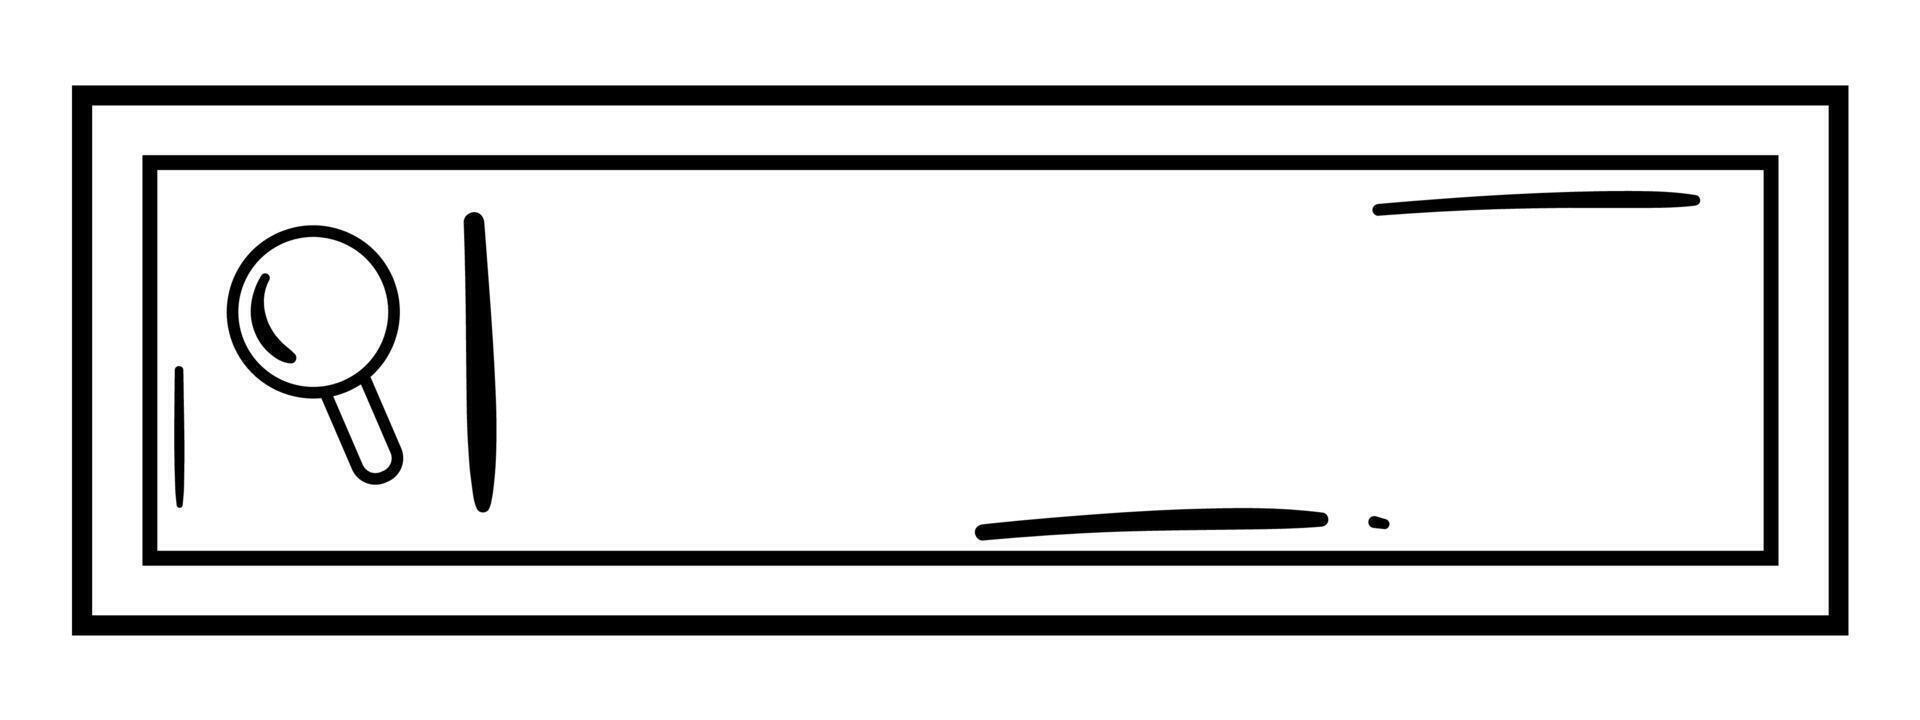 Doodle Style Black and White Search Bar Featuring a Research Rectangle Frame and Magnifying Glass. vector